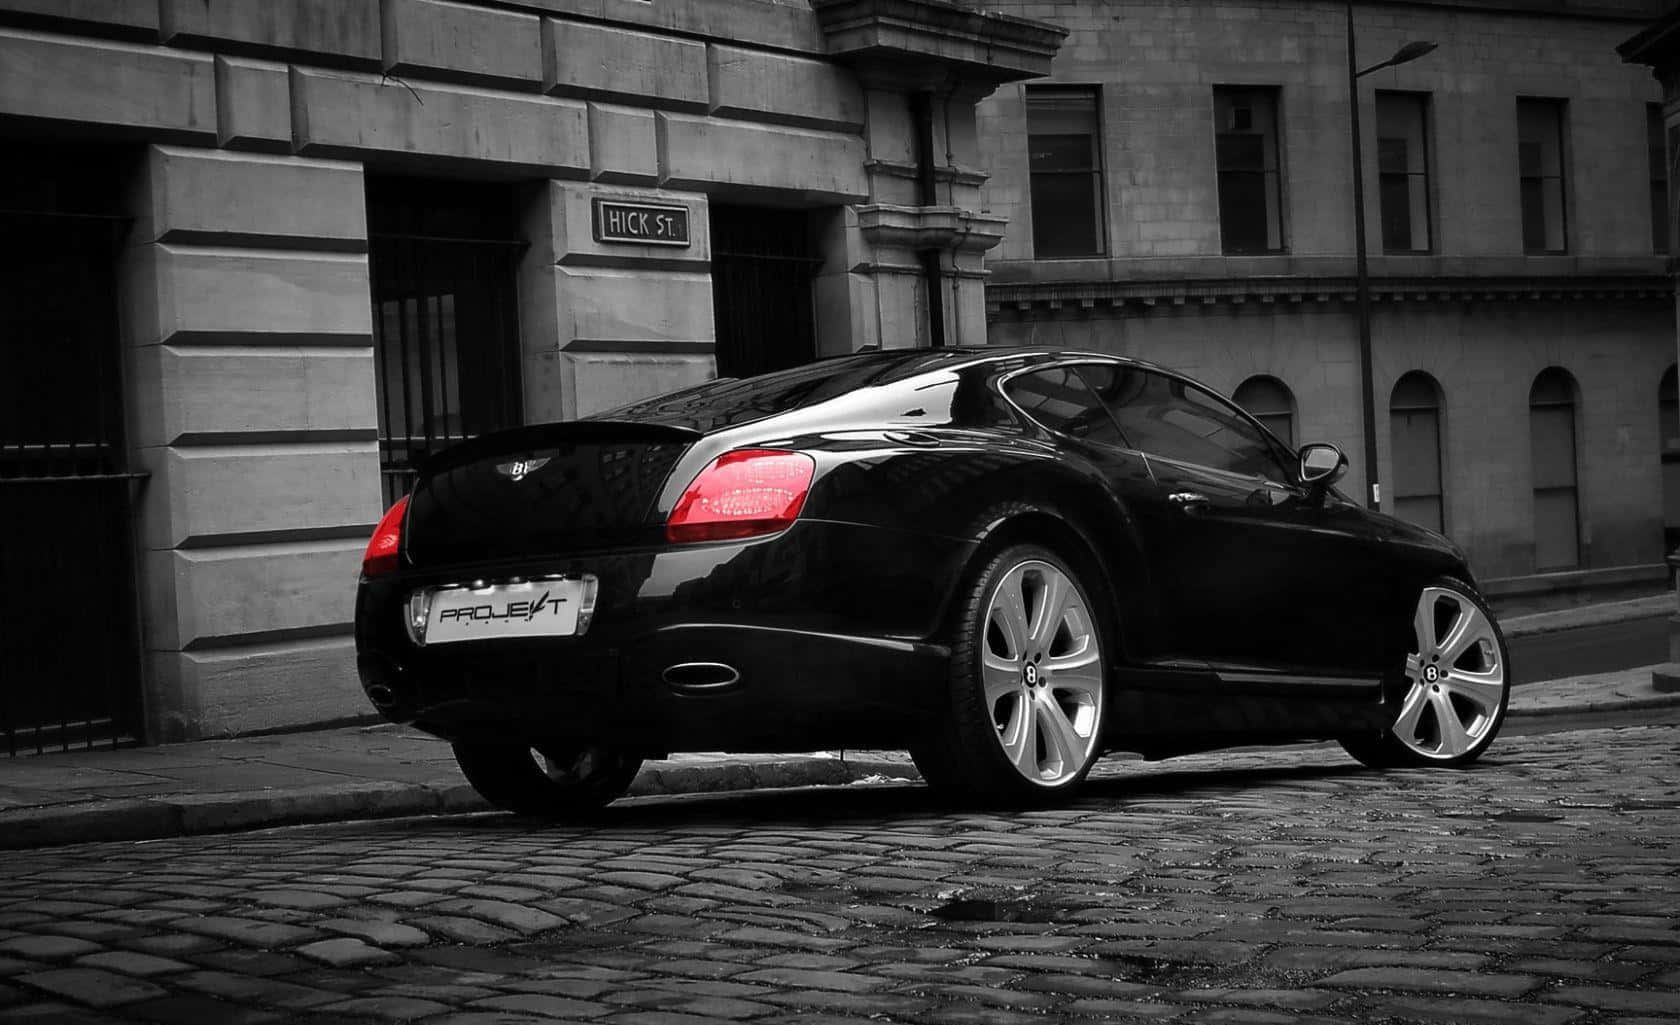 Caption: Luxury Meets Performance: The Bentley Continental GT Wallpaper